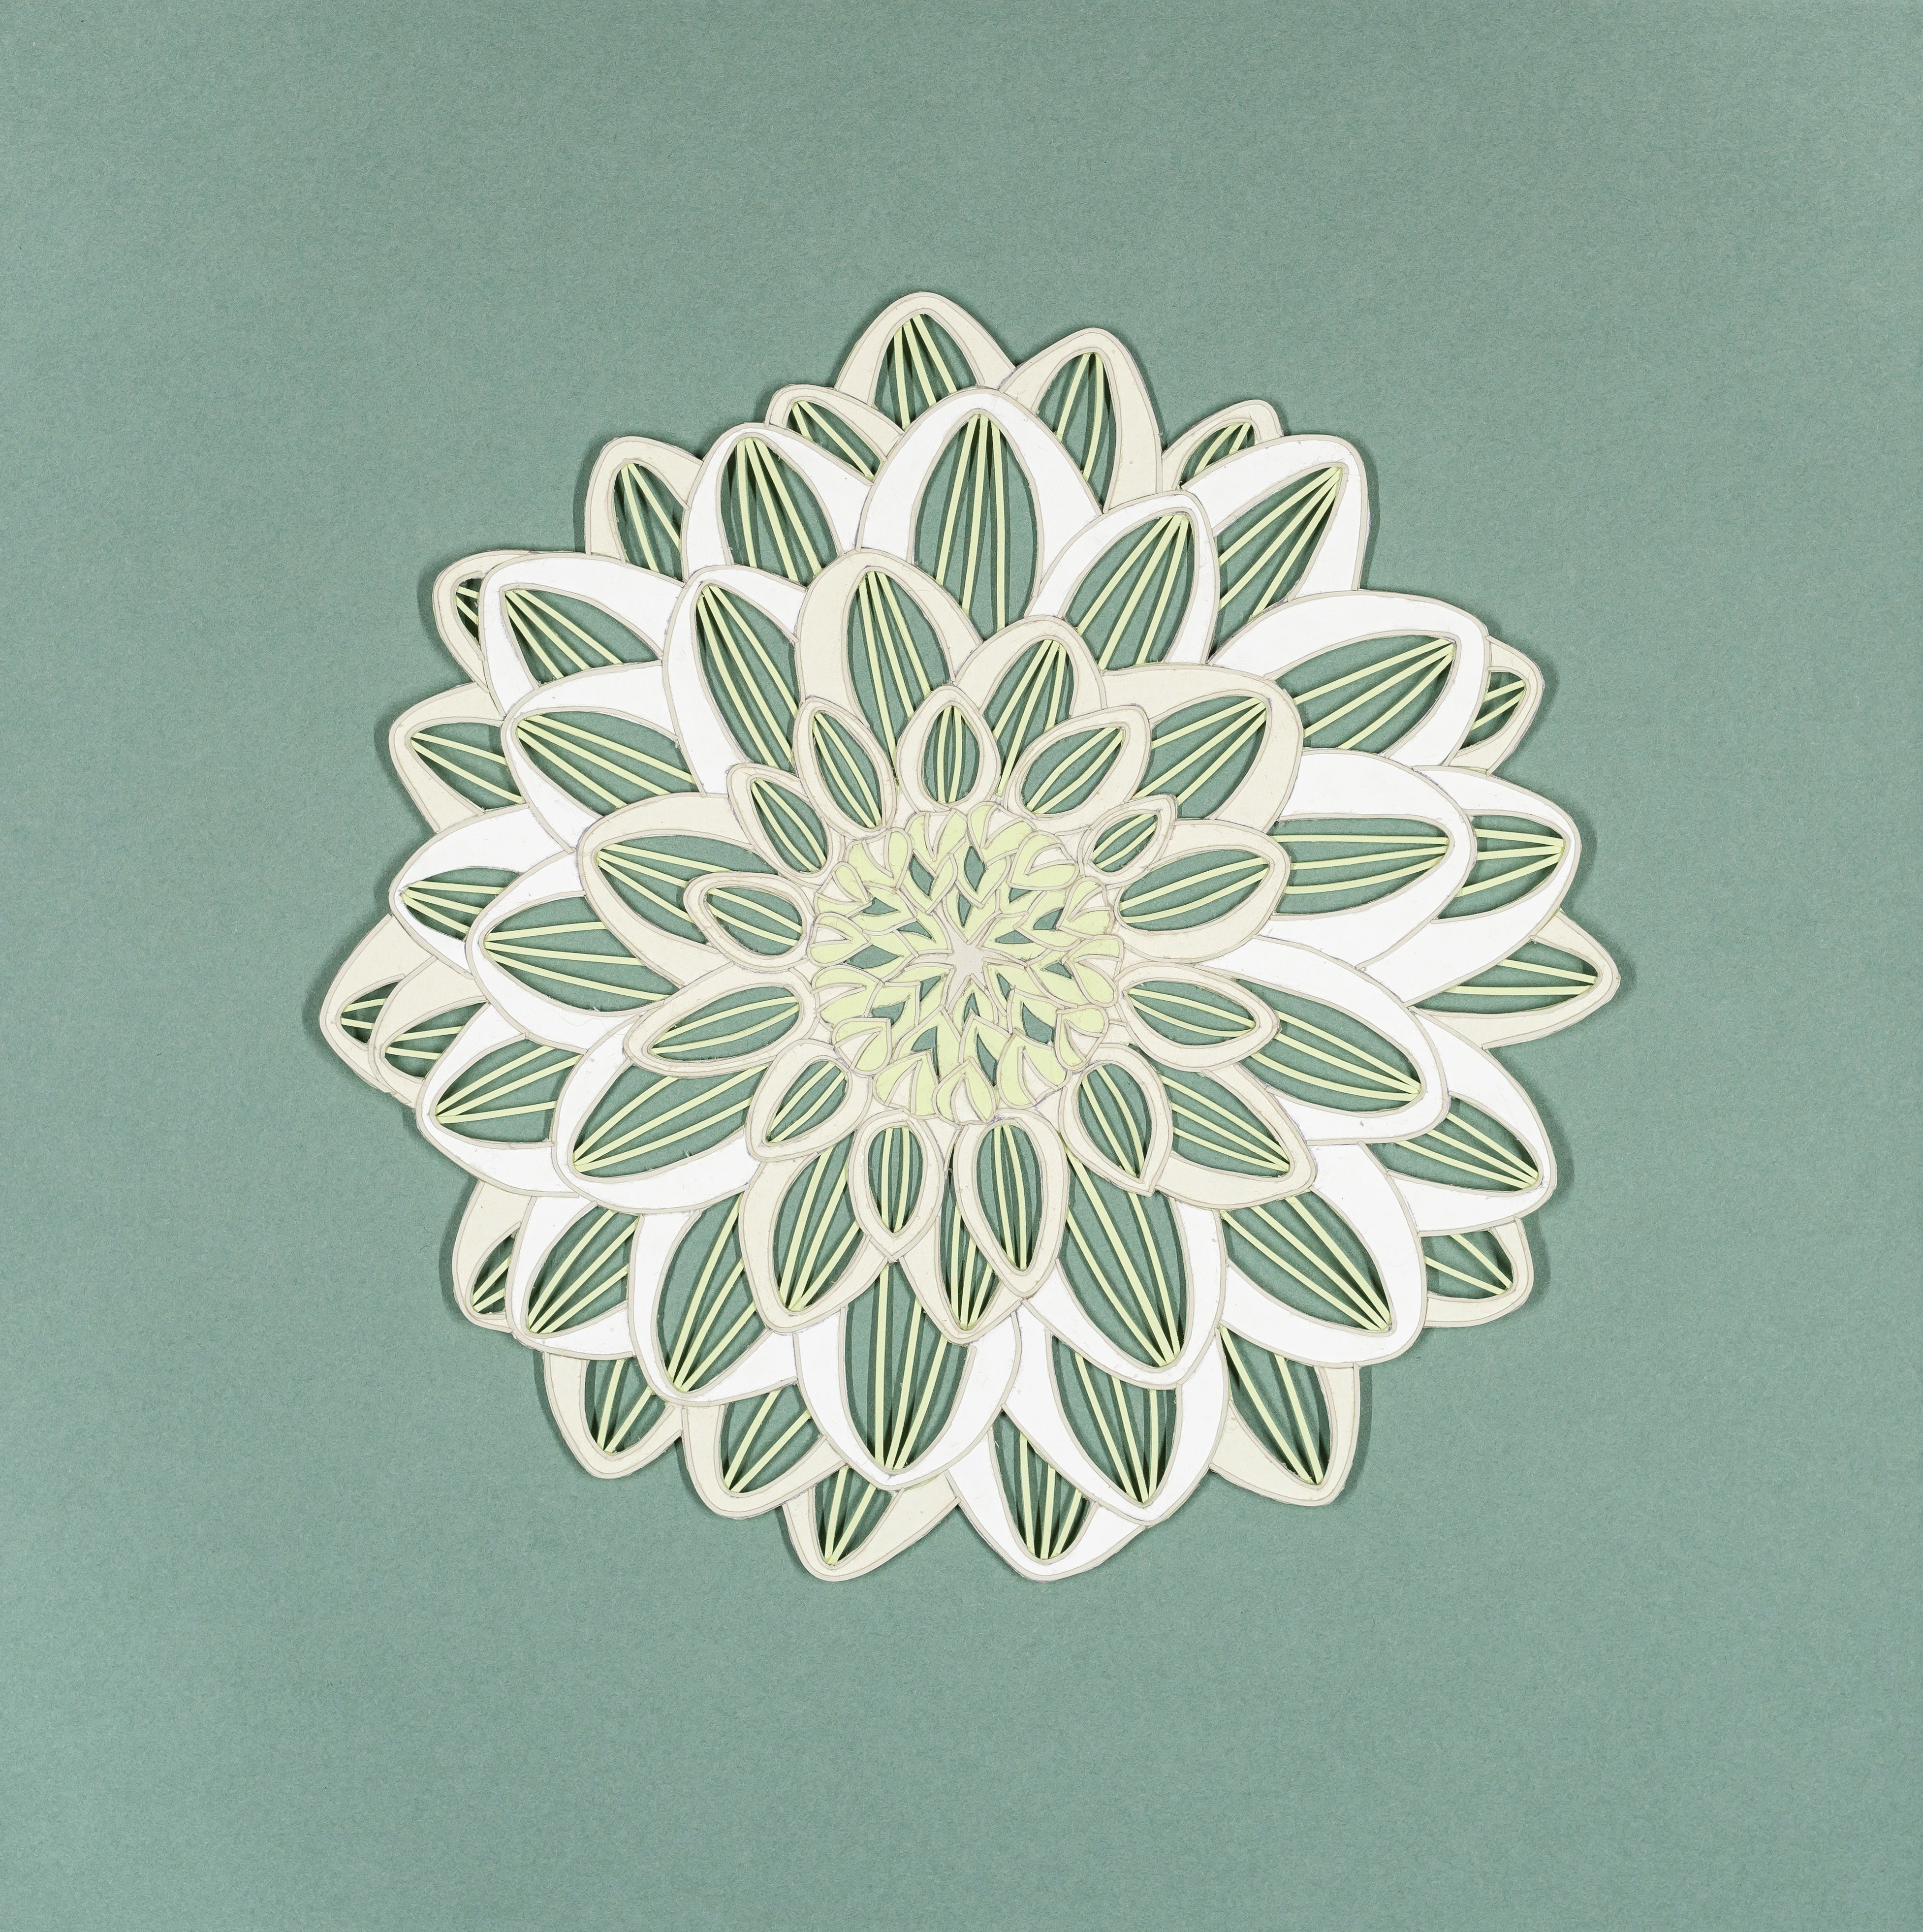 Dahlia Hortensis ‘Frost’ paper cut art by Yola and Daria